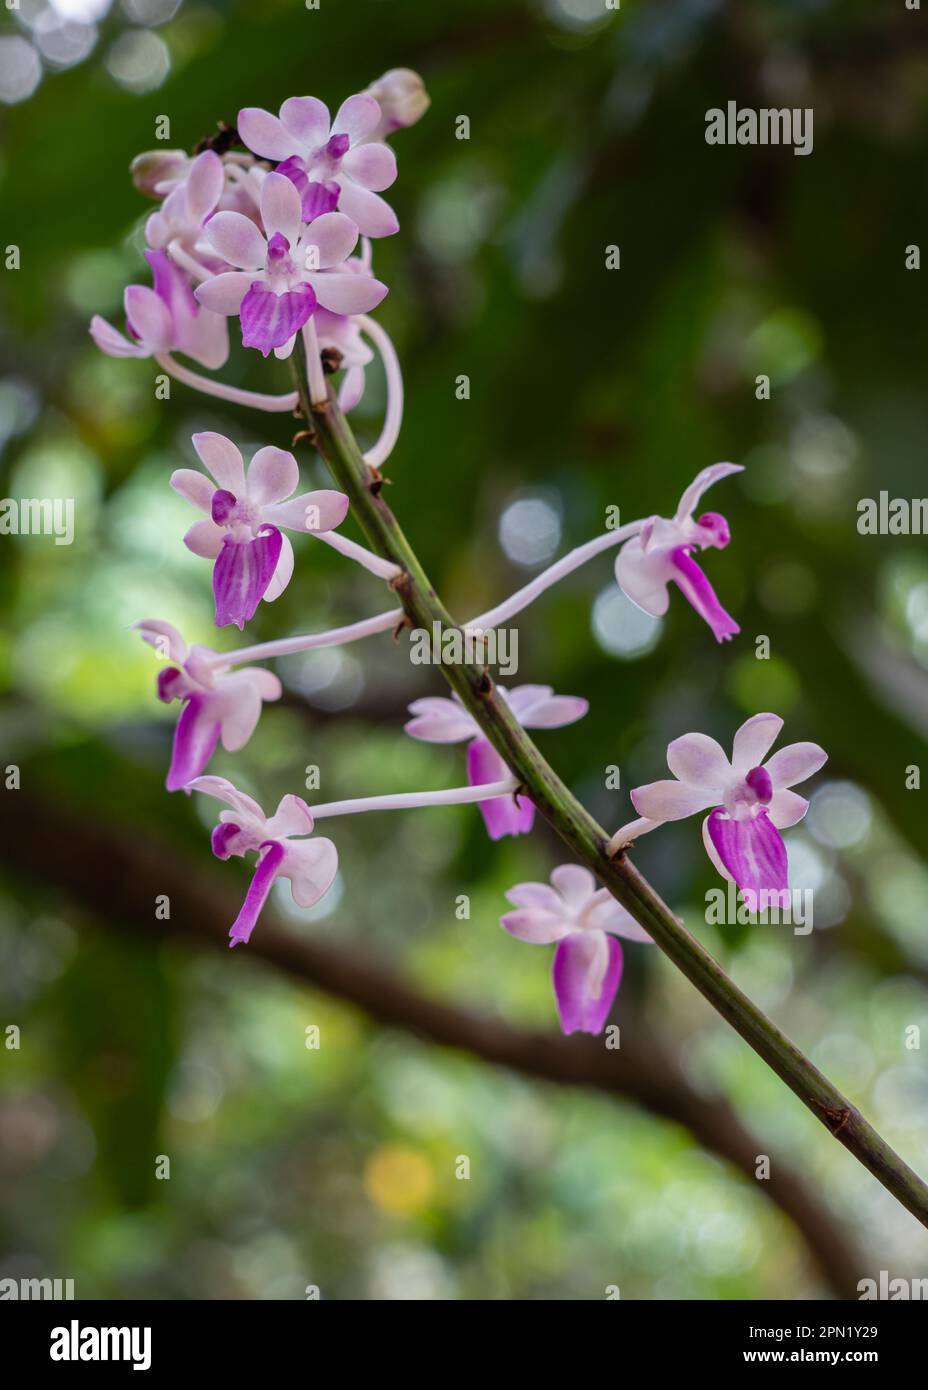 Closeup vertical view of epiphytic orchid species seidenfadenia mitrata purple pink and white flowers blooming outdoors in tropical garden Stock Photo